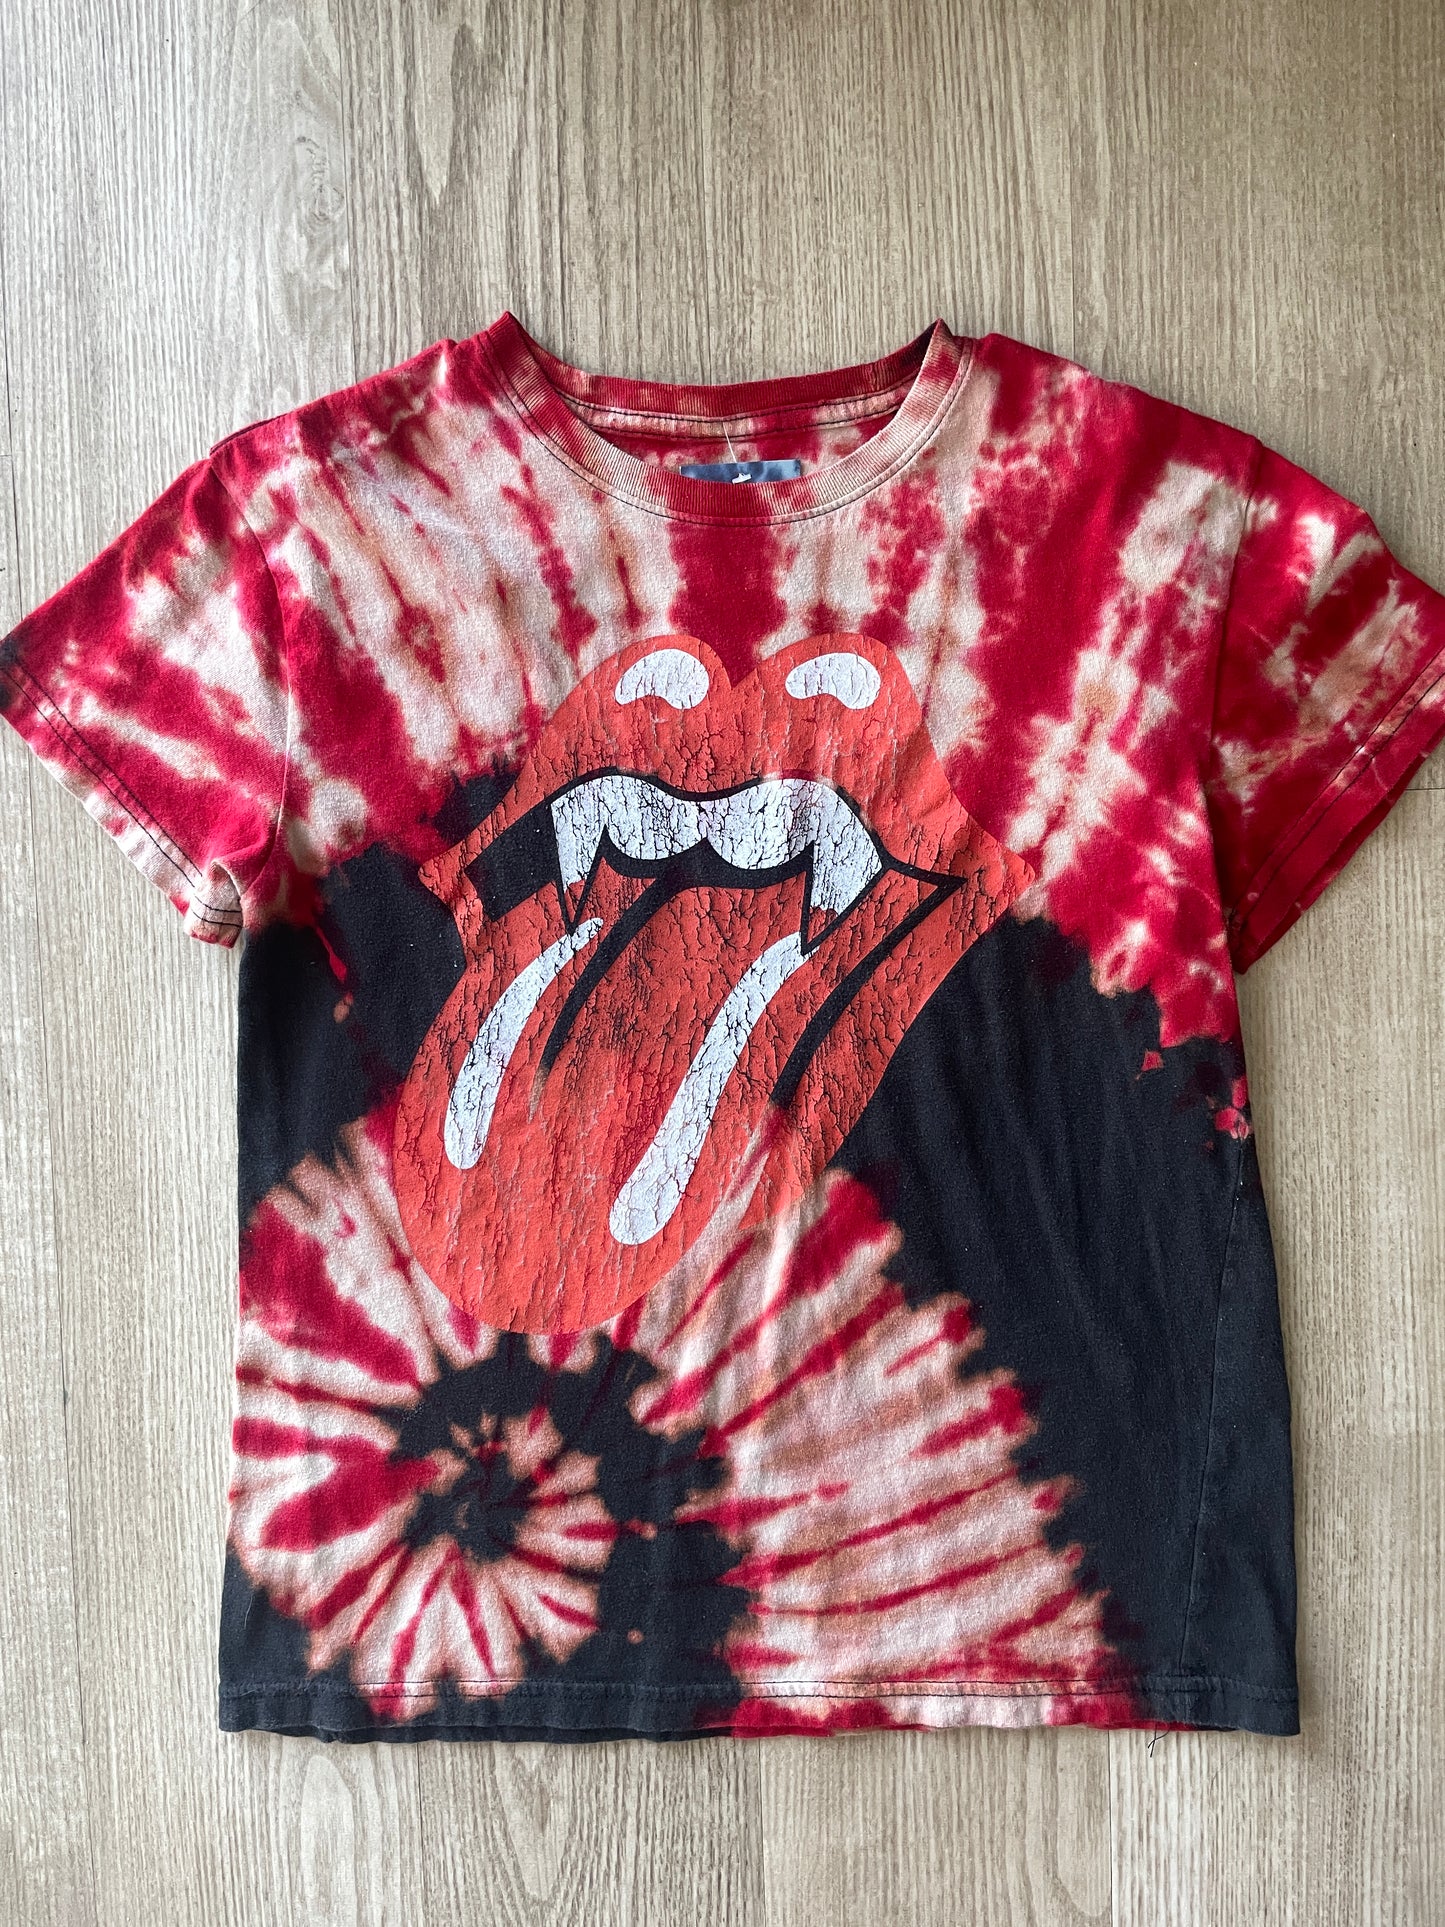 MEDIUM Women's Rolling Stones Hot Lips Handmade Reverse Tie Dye Short Sleeve T-Shirt | One-Of-a-Kind Upcycled Red and Black Spiral Top